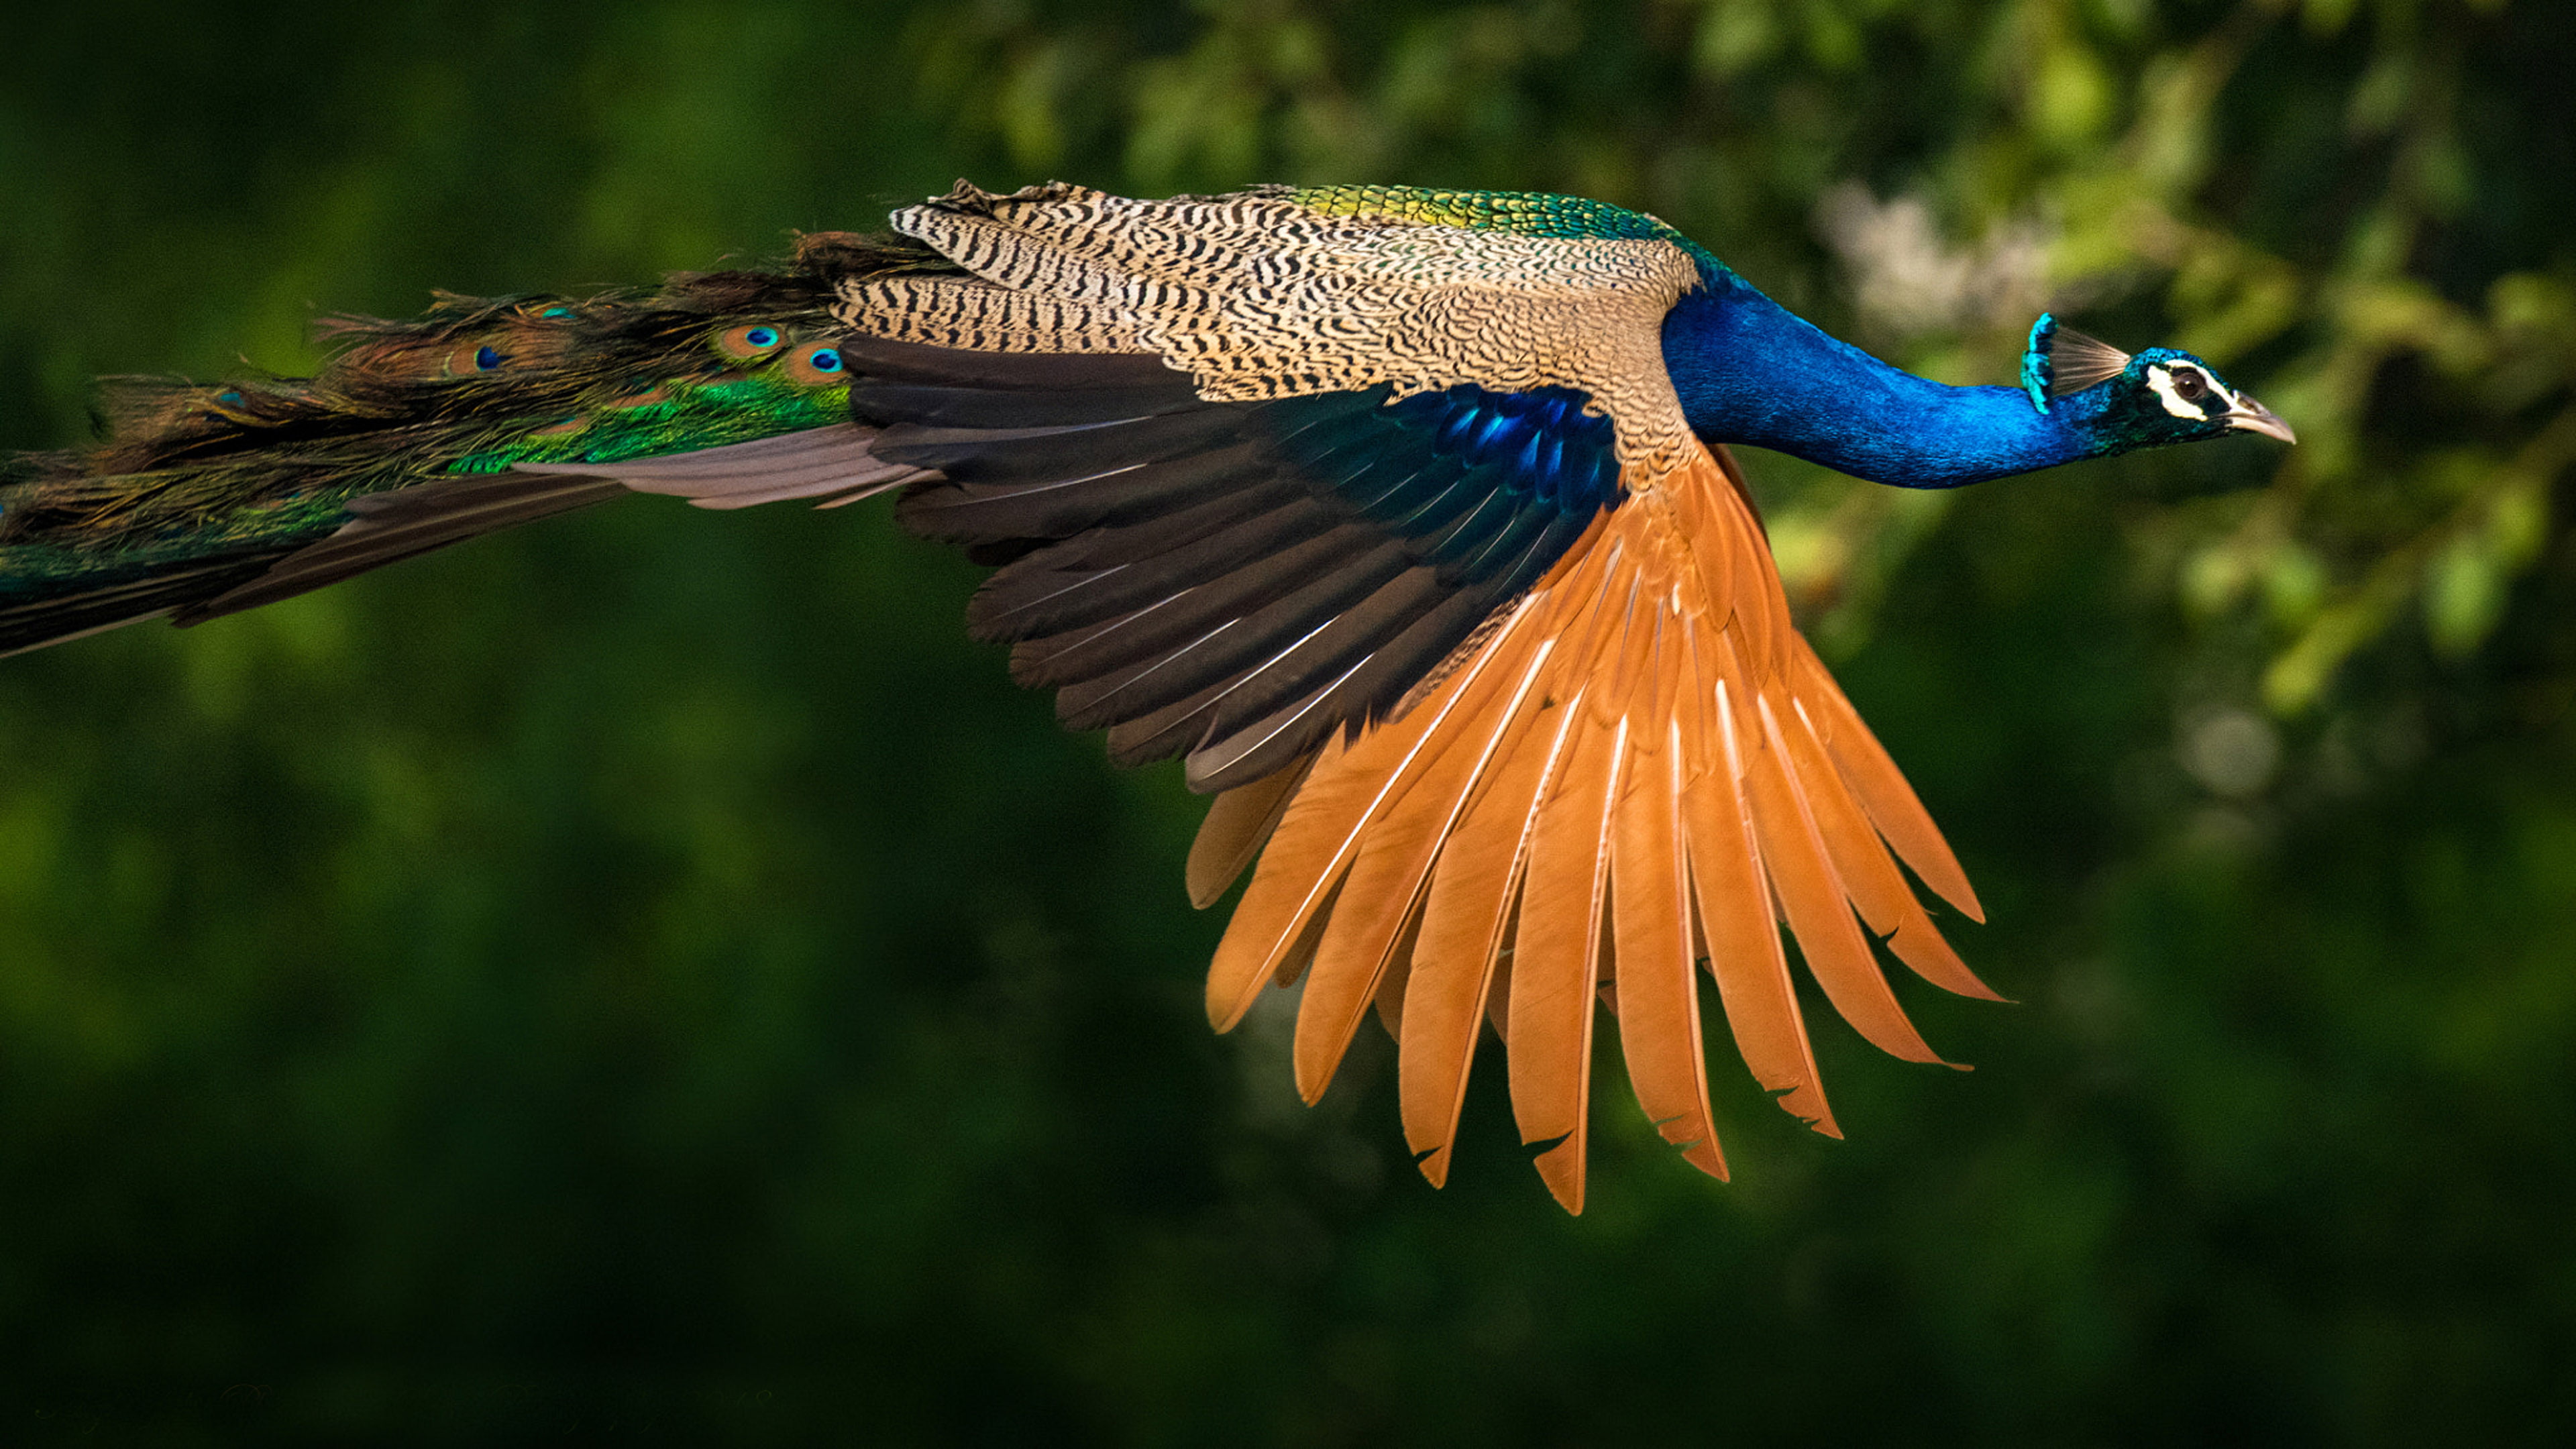 Birds Indian Peafowl Or Peacocks Indian Peacock Colored Birds With Green And Blue Feathers Ultra Hd Wallpapers For Desktop Mobile Phones And Laptop 3840×2160